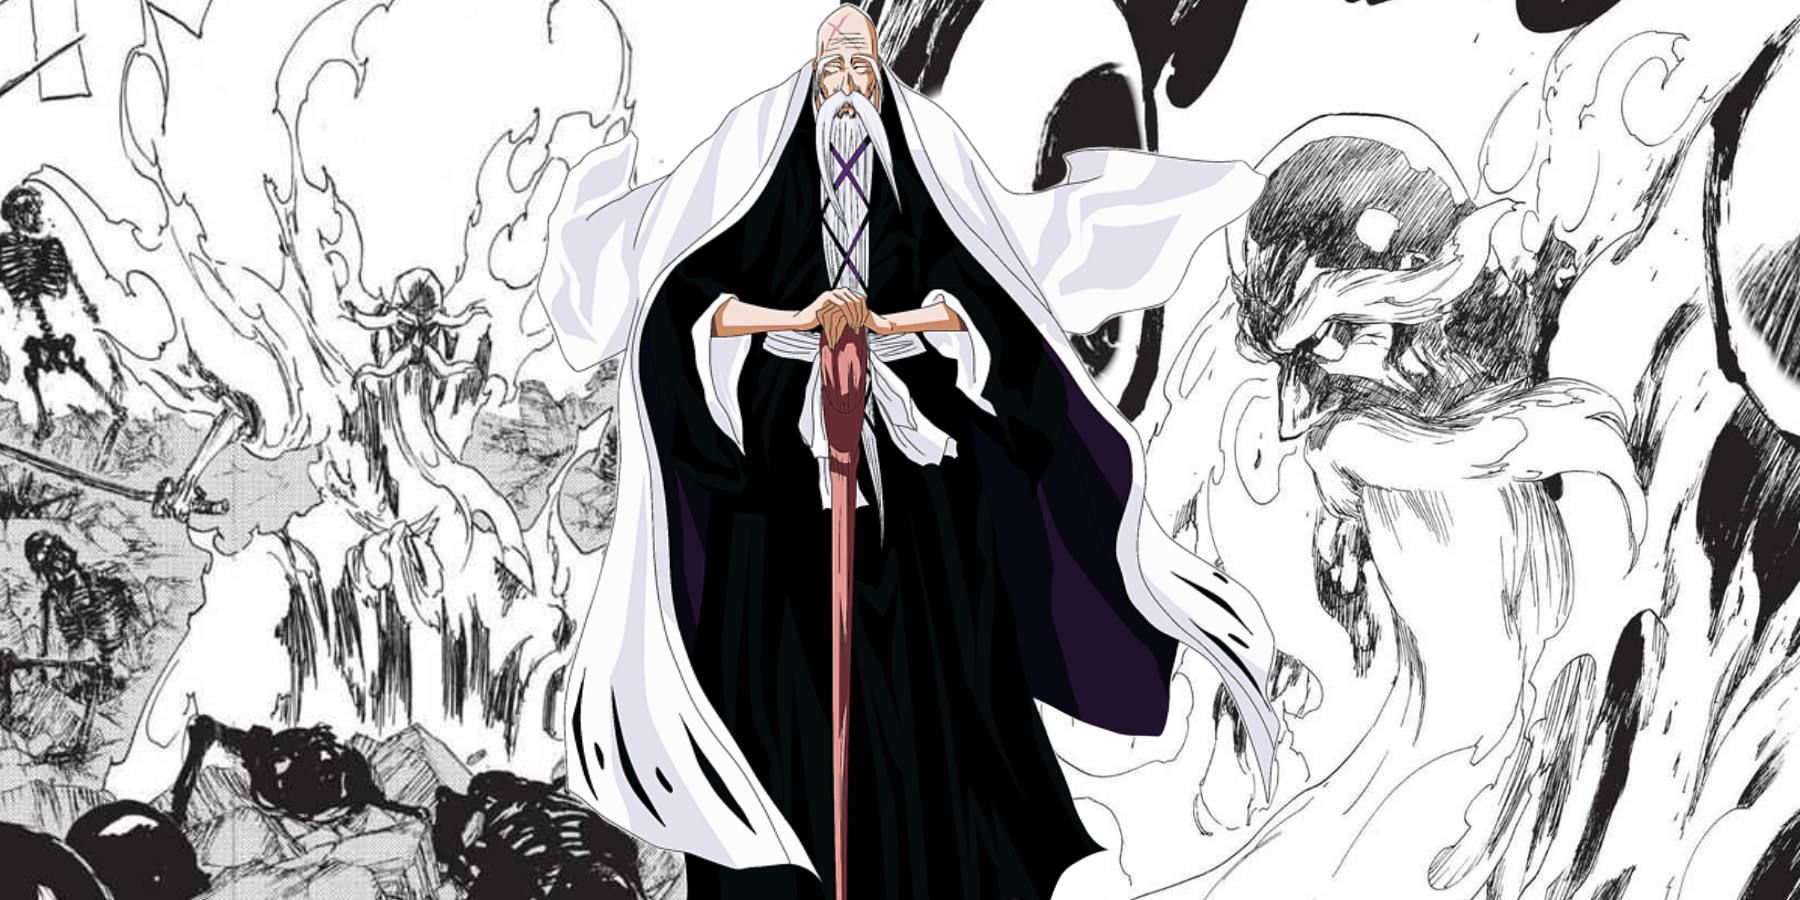 MangaThrill - Captain Yamamoto is in action as Bleach